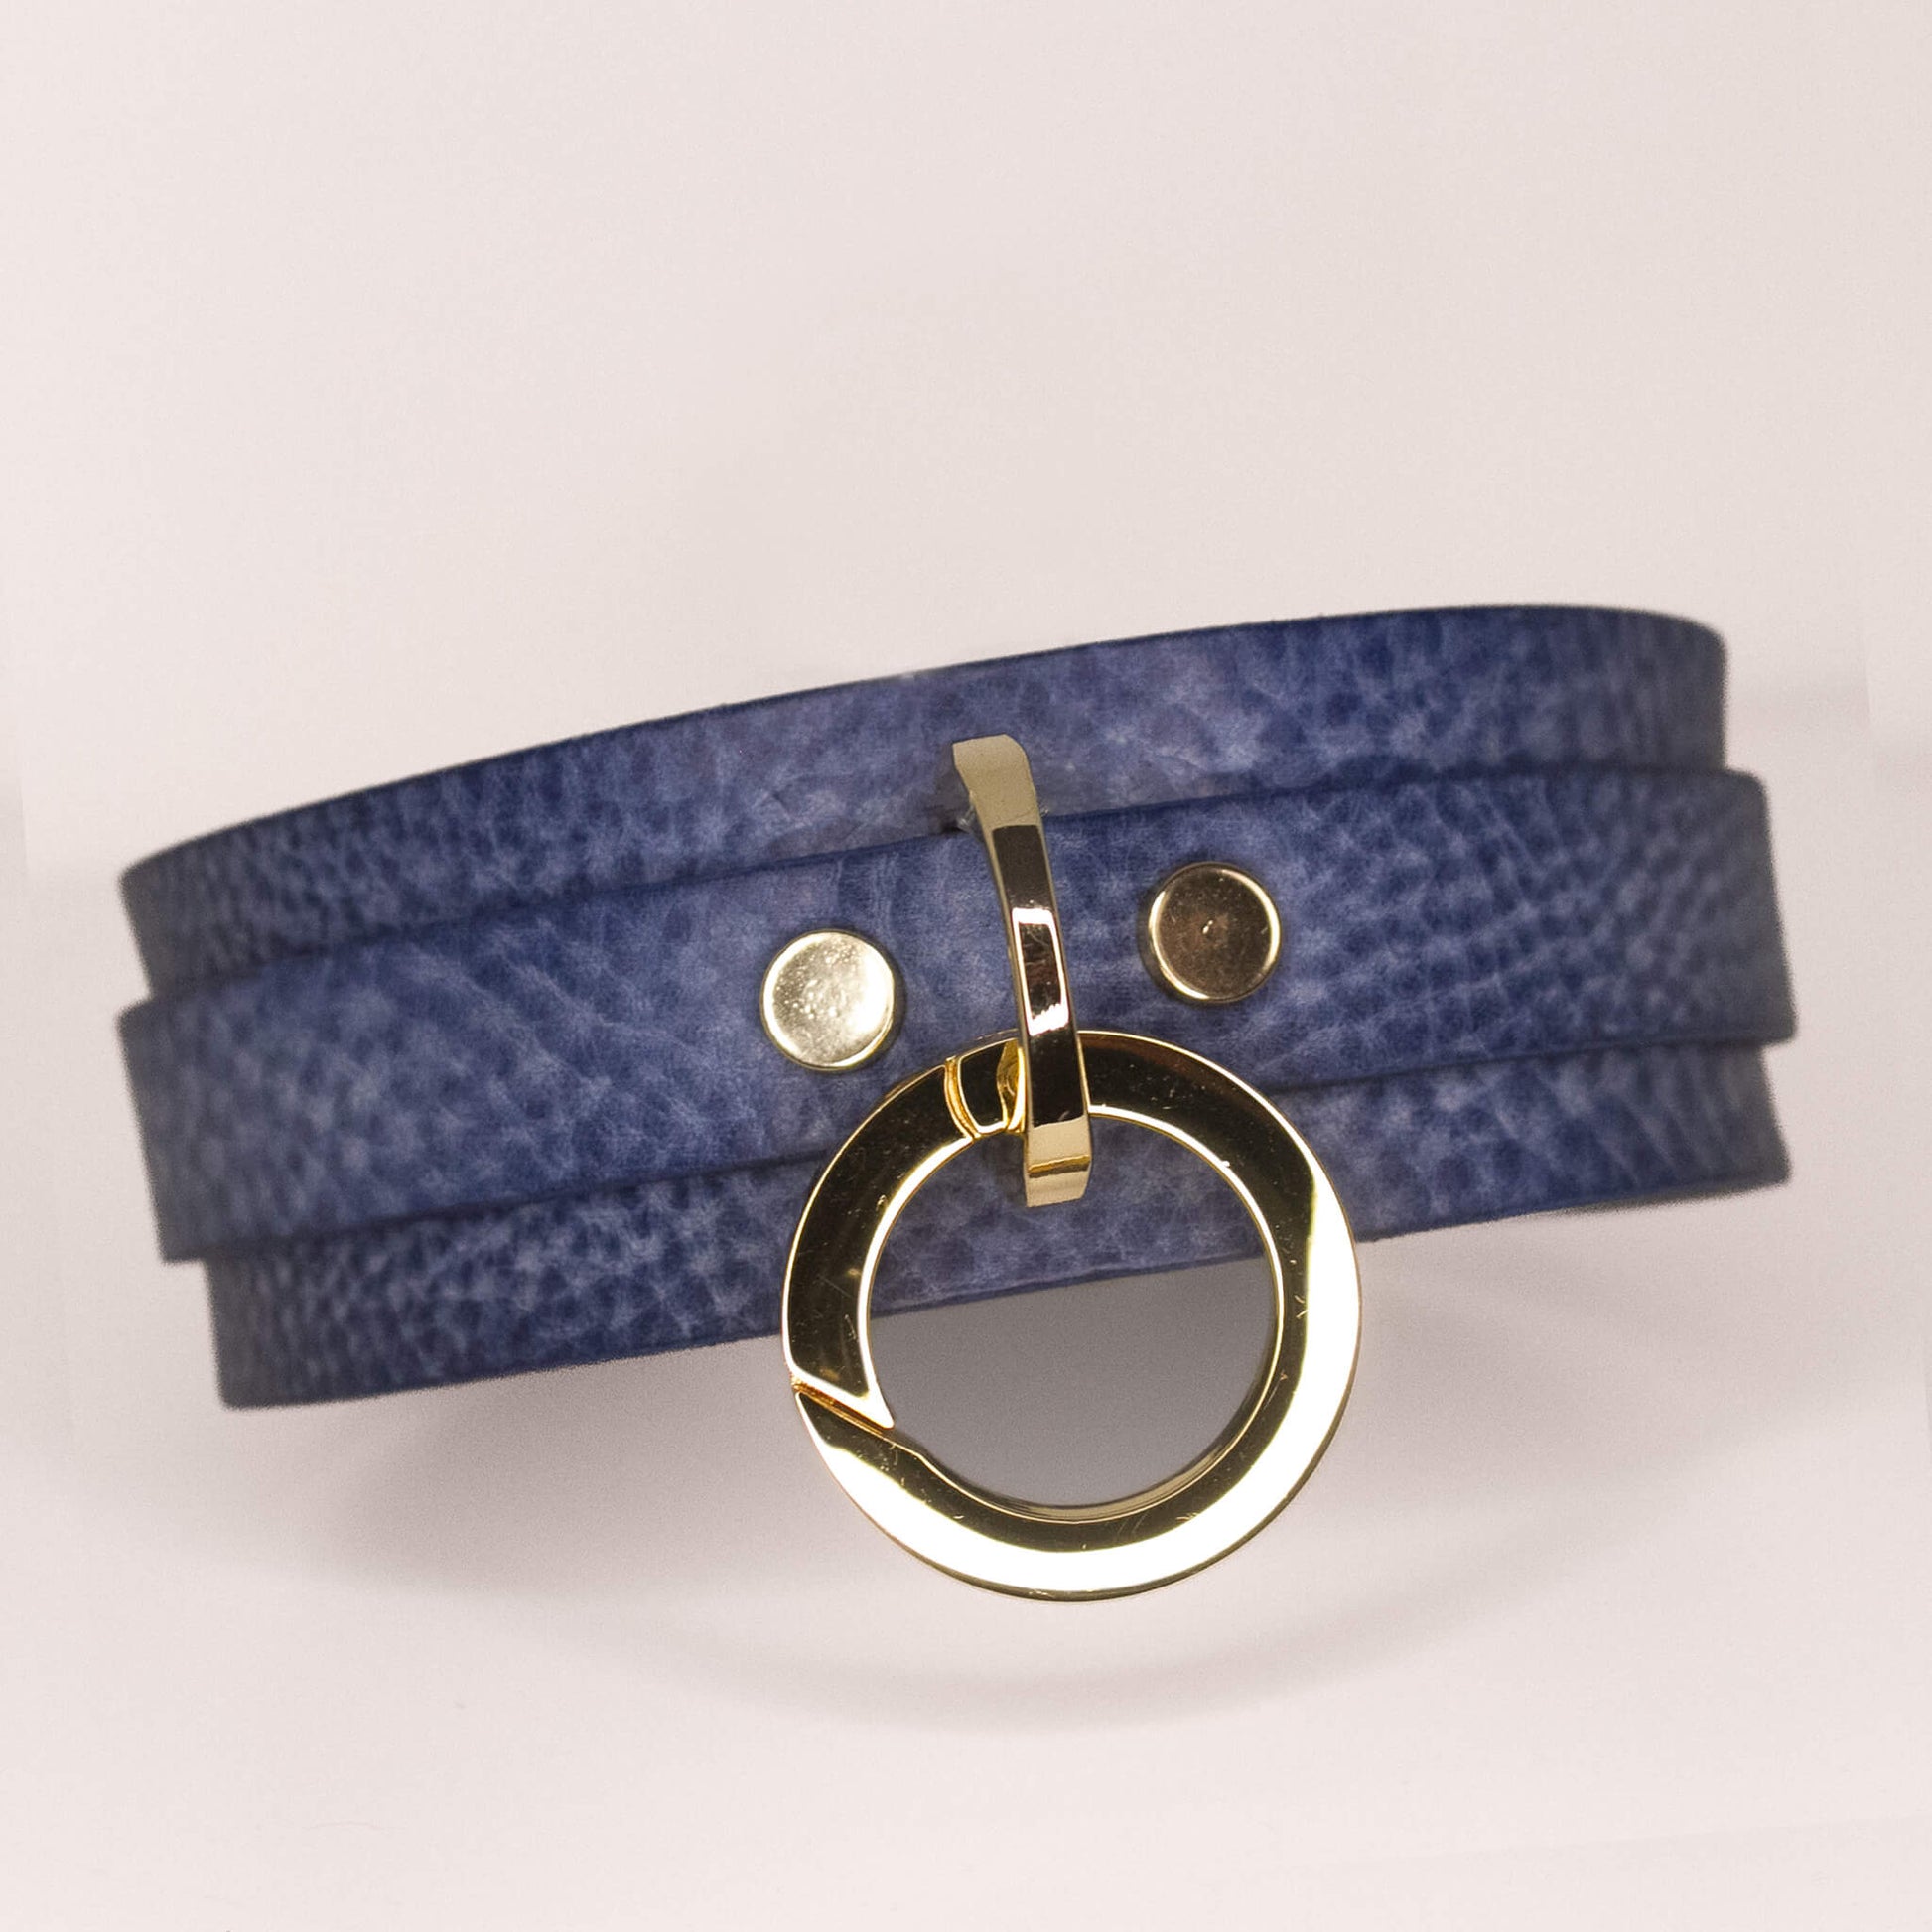 Handcrafted Horizon Collection BDSM leather collar in denim blue with textured finish and elegant gold-tone O-ring detail, available in various sizes for a custom fit.